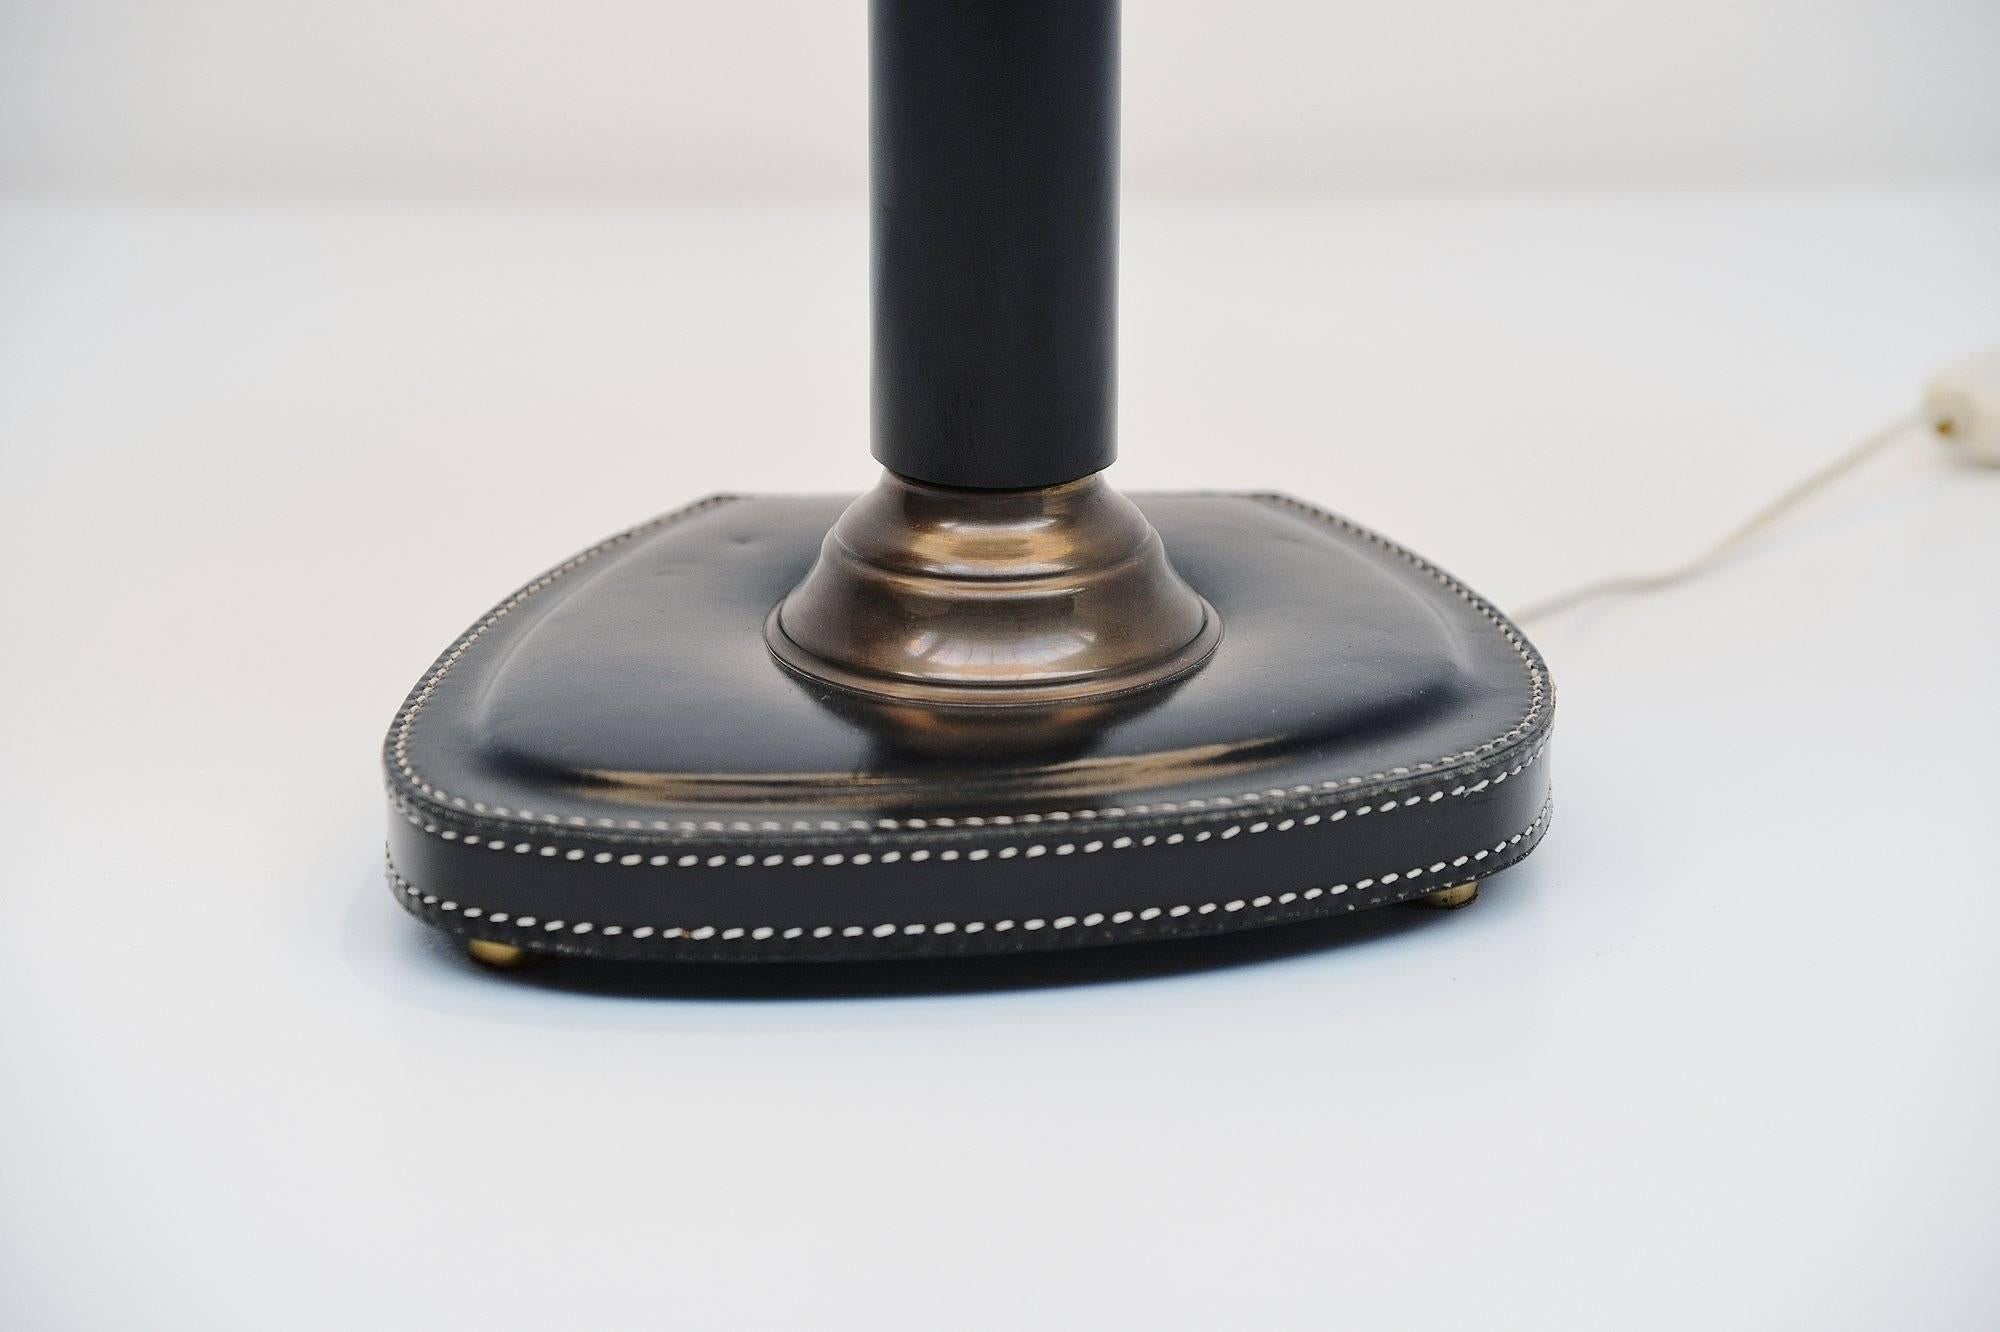 Nice and decorative table lamp in the style of Jacques Adnet, France 1960. This table lamp has a black stitched leather foot and brass details. The shade is newly covered with off white fabric. The lamp gives very nice and warm light when lit and is